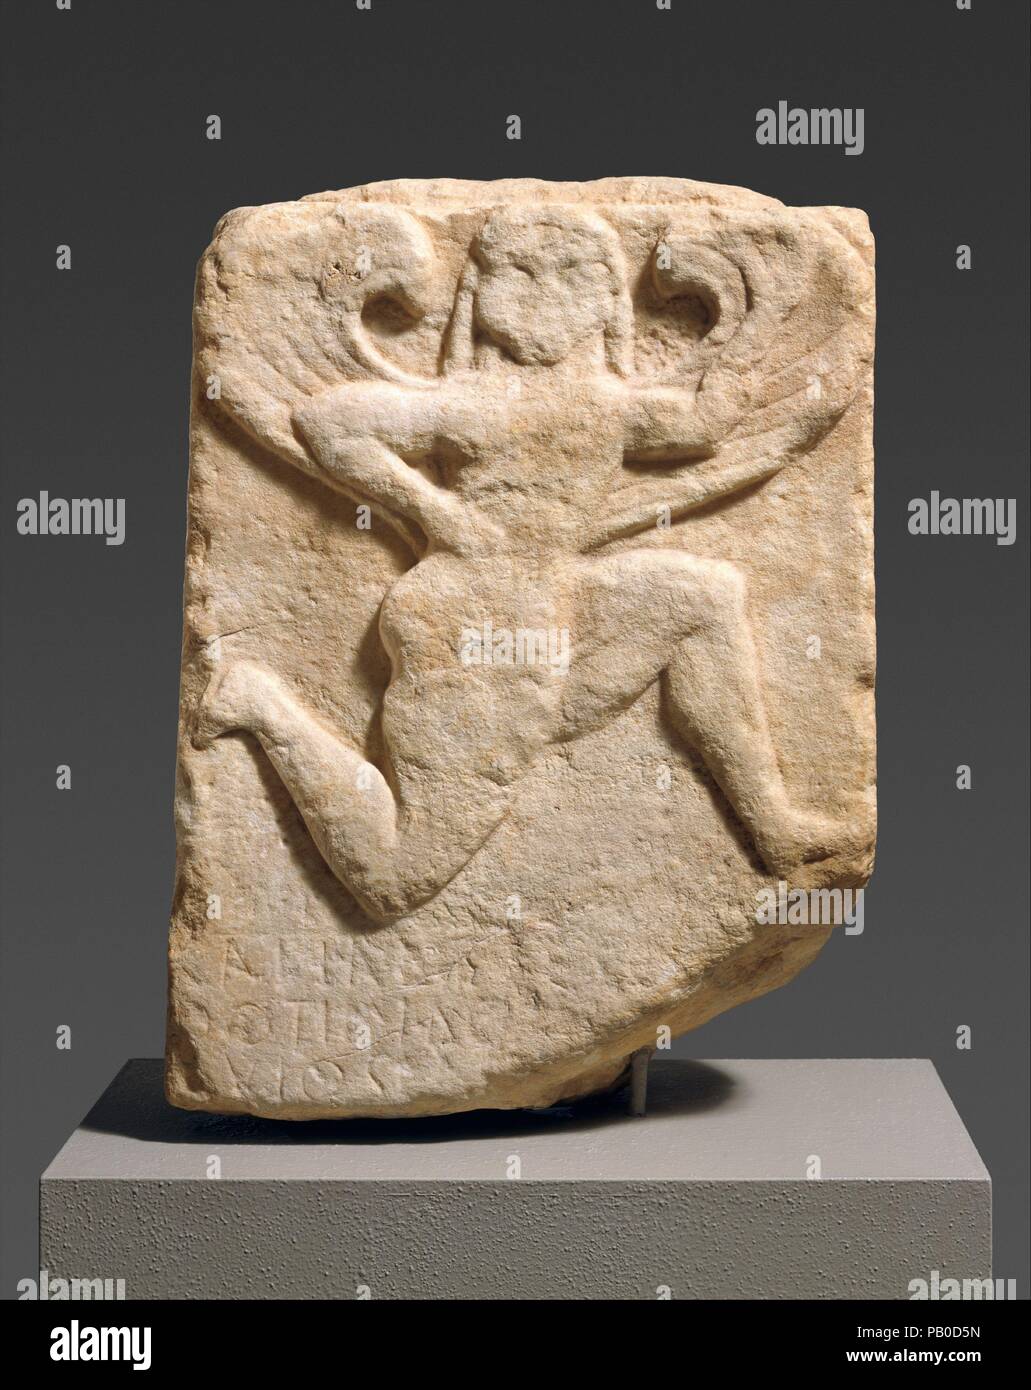 Part of the marble stele (grave marker) of Kalliades. Culture: Greek, Attic. Dimensions: 21 1/2in. (54.6cm)  Other (height without tenon): 20 7/8 in. (53 cm)  Other (median thickness): 6 in. × 15 3/4 in. (15.2 × 40 cm)  Width (top): 14 3/4 in. (37.5 cm)  Width (bottom): 15 9/16 in. (39.5 cm). Date: 550-525 BC.  A fleeing Gorgon decorates this tapering, predella-looking slab, part of the grave stele of Kalliades, as we learn from the inscription carved in three lines from left to right below the Gorgon's left knee: 'Kalliades, son of Thoutimides'.  The Gorgon, dressed in a short chiton, spreads Stock Photo